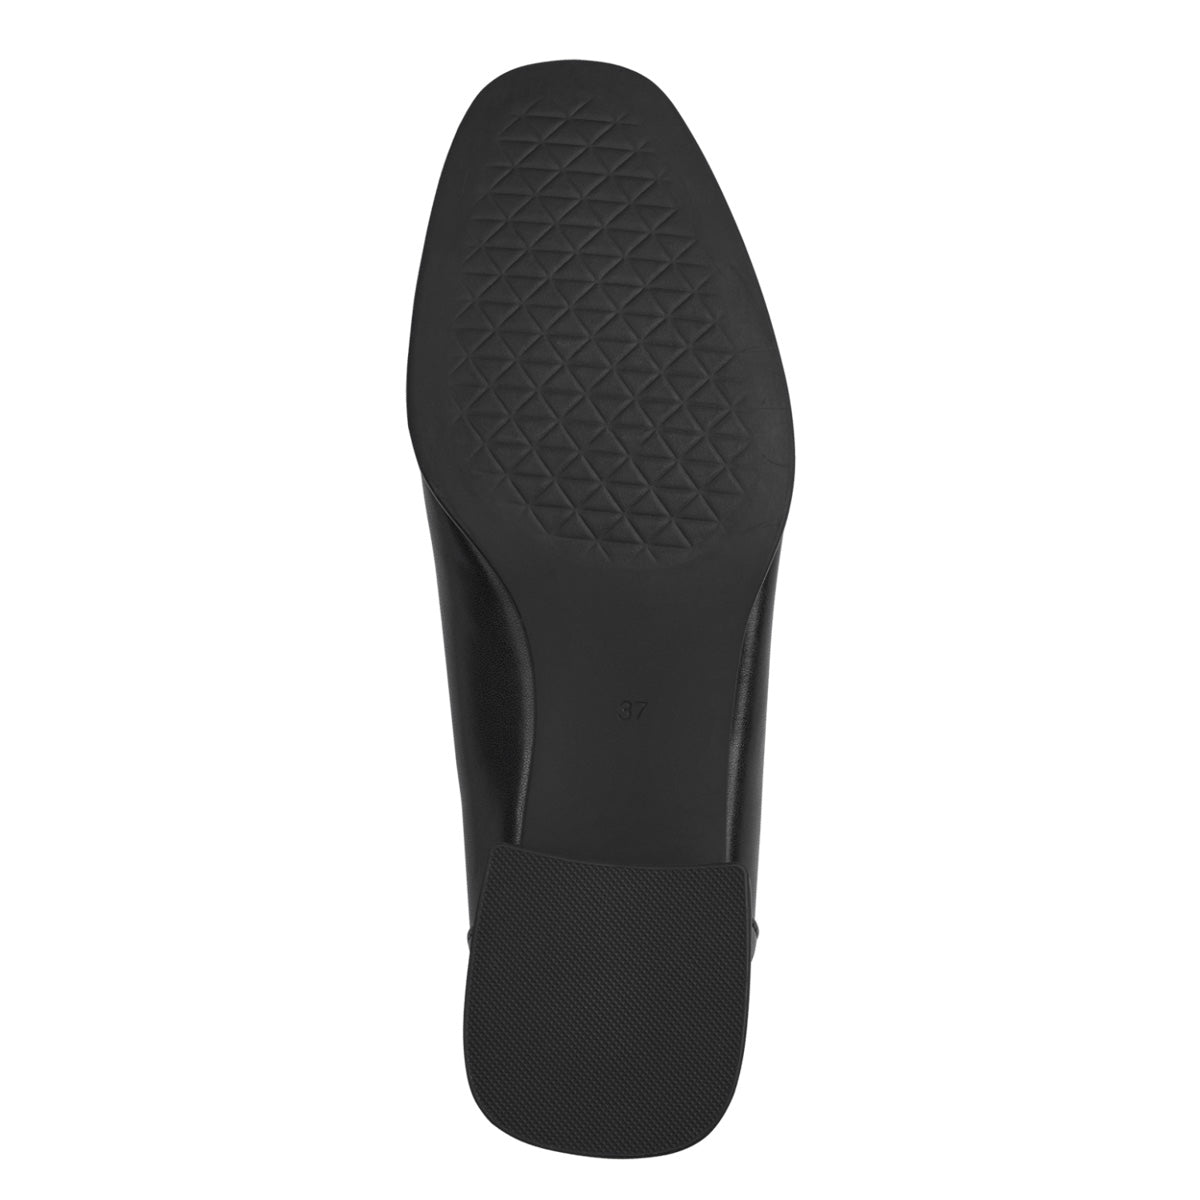 Bottom view, showing the black sole's durability and design.